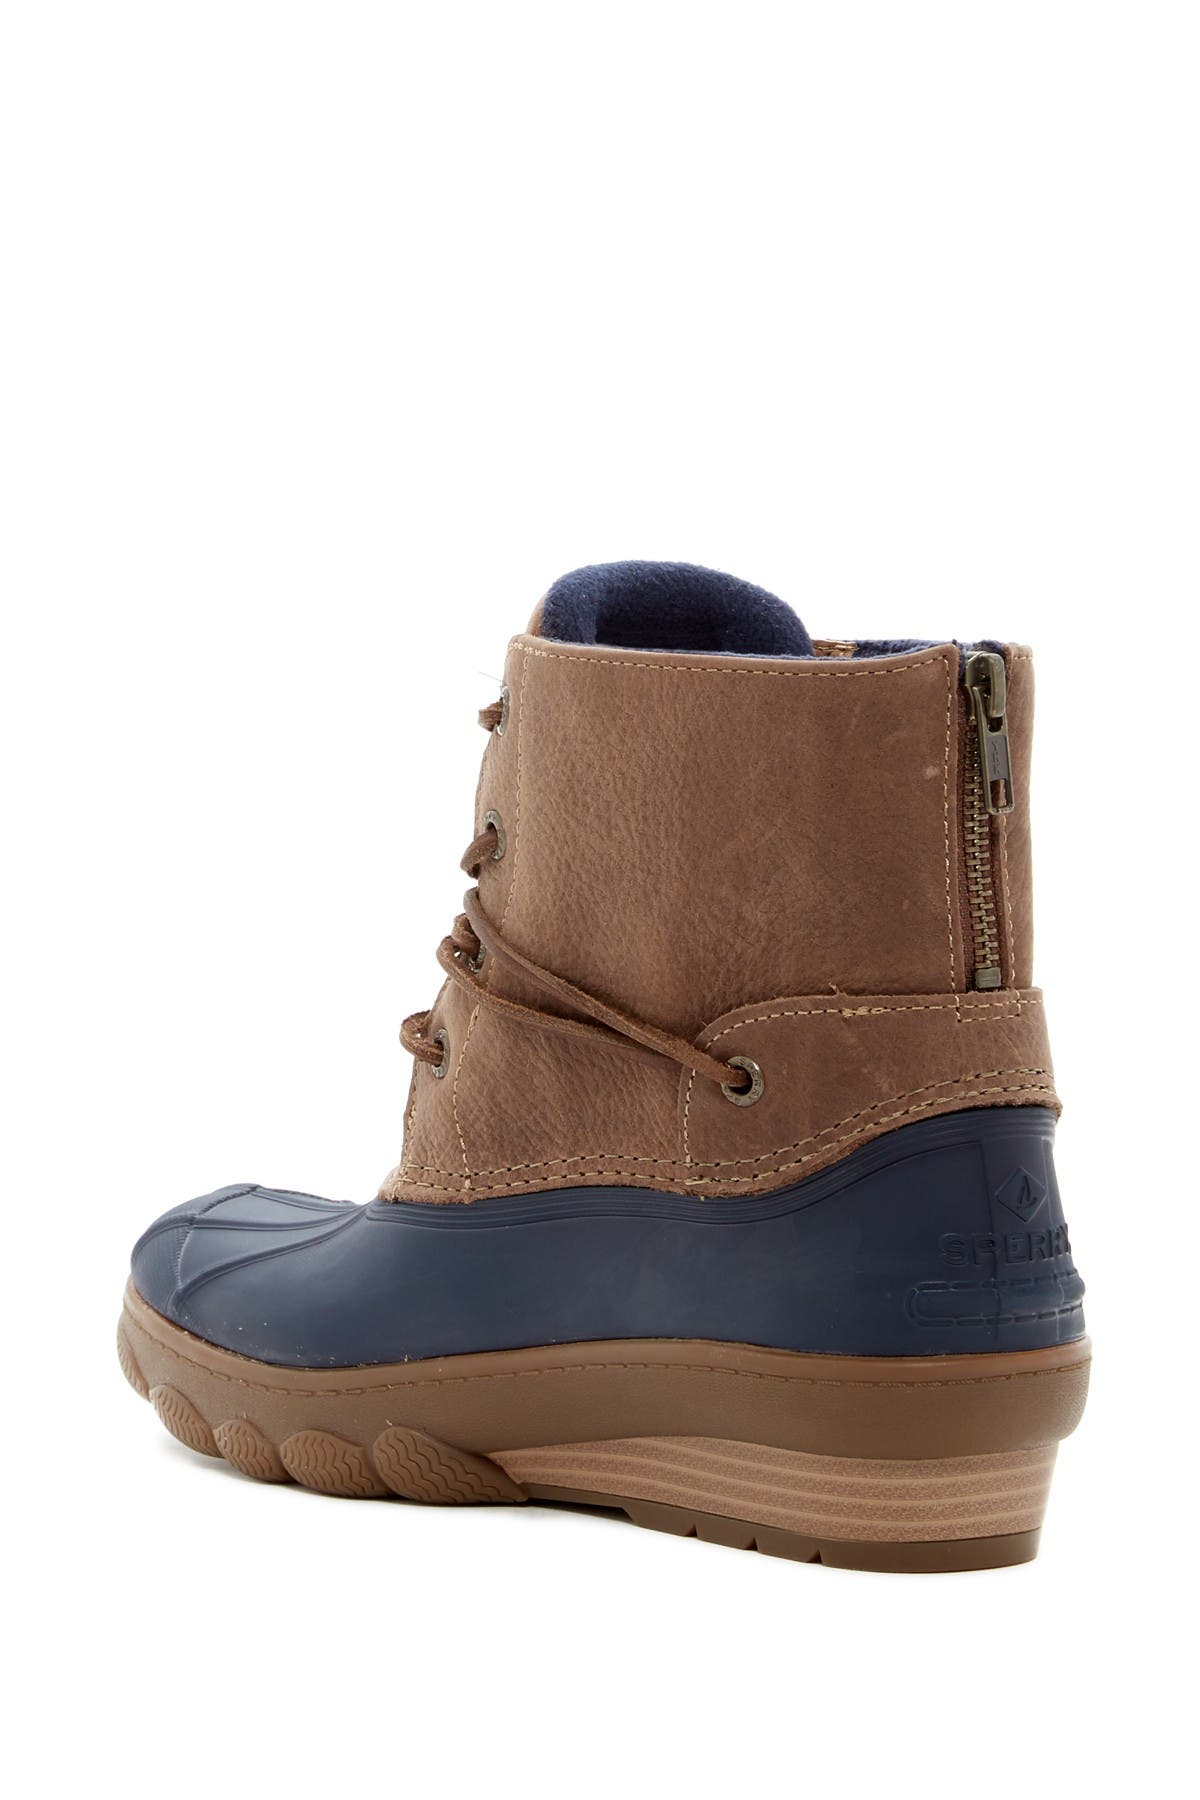 sperry saltwater tide wedge boot